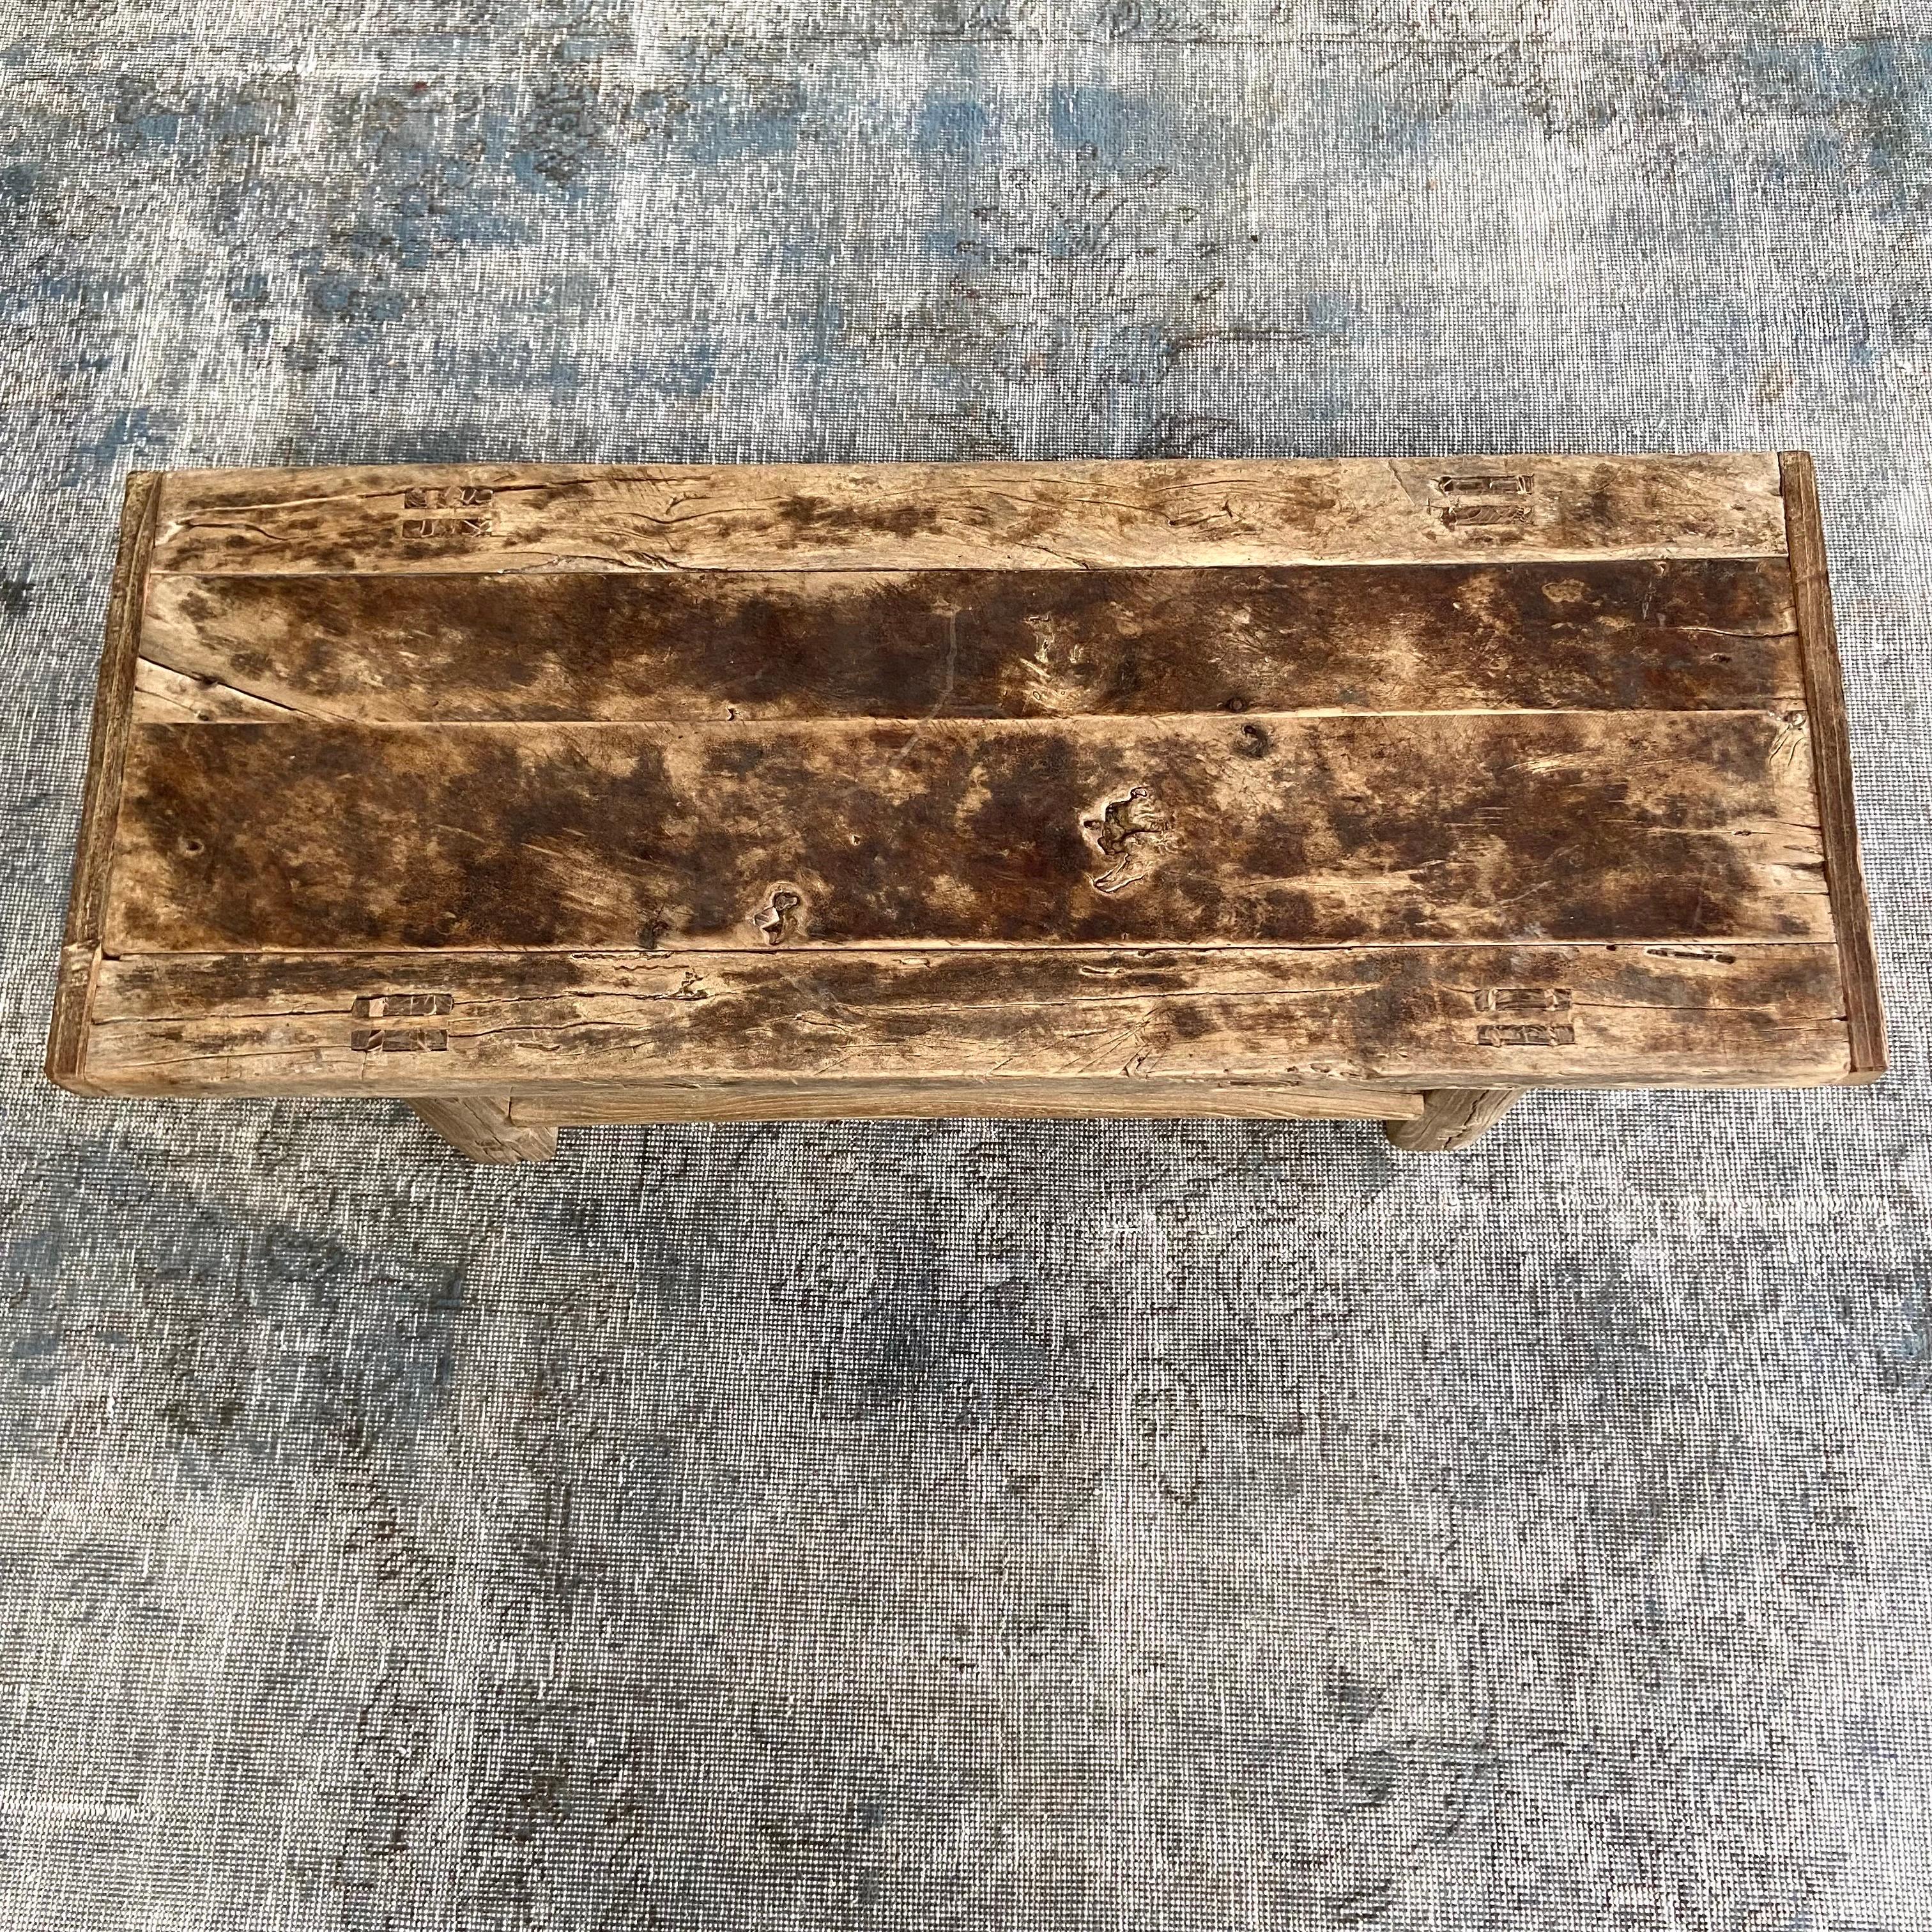 Vintage antique elm wood coffee table with beautiful antique weathered patina top. These are the real vintage antique elm wood coffee table! Beautiful antique patina, with weathering and age, these are solid and sturdy ready for daily use, use as a